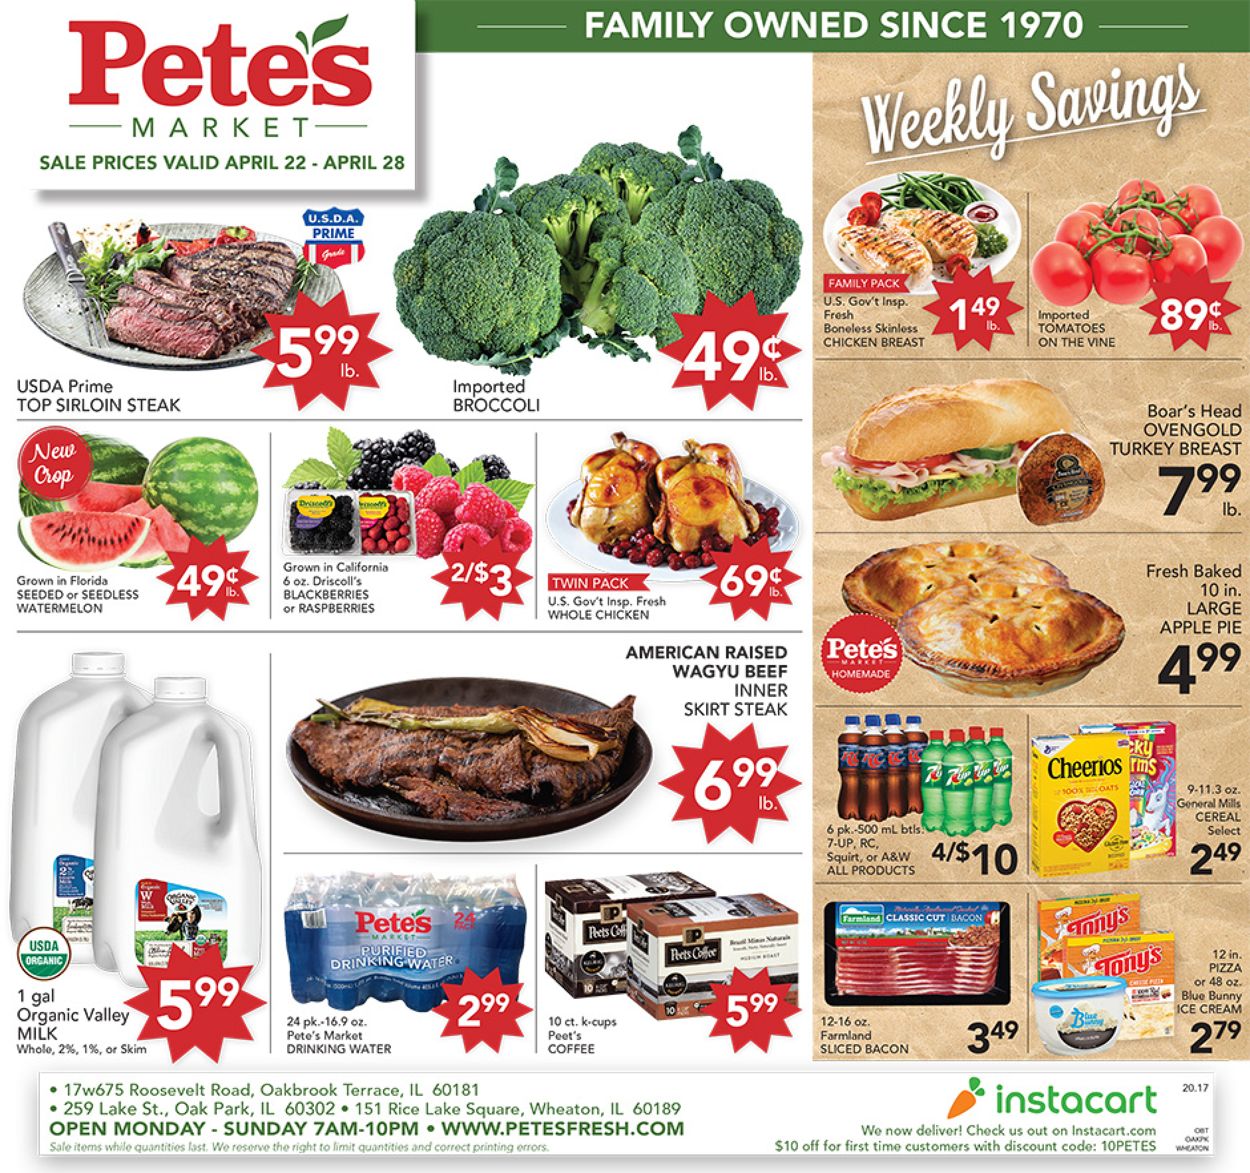 Pete's Fresh Market Current weekly ad 04/22 - 04/28/2020.